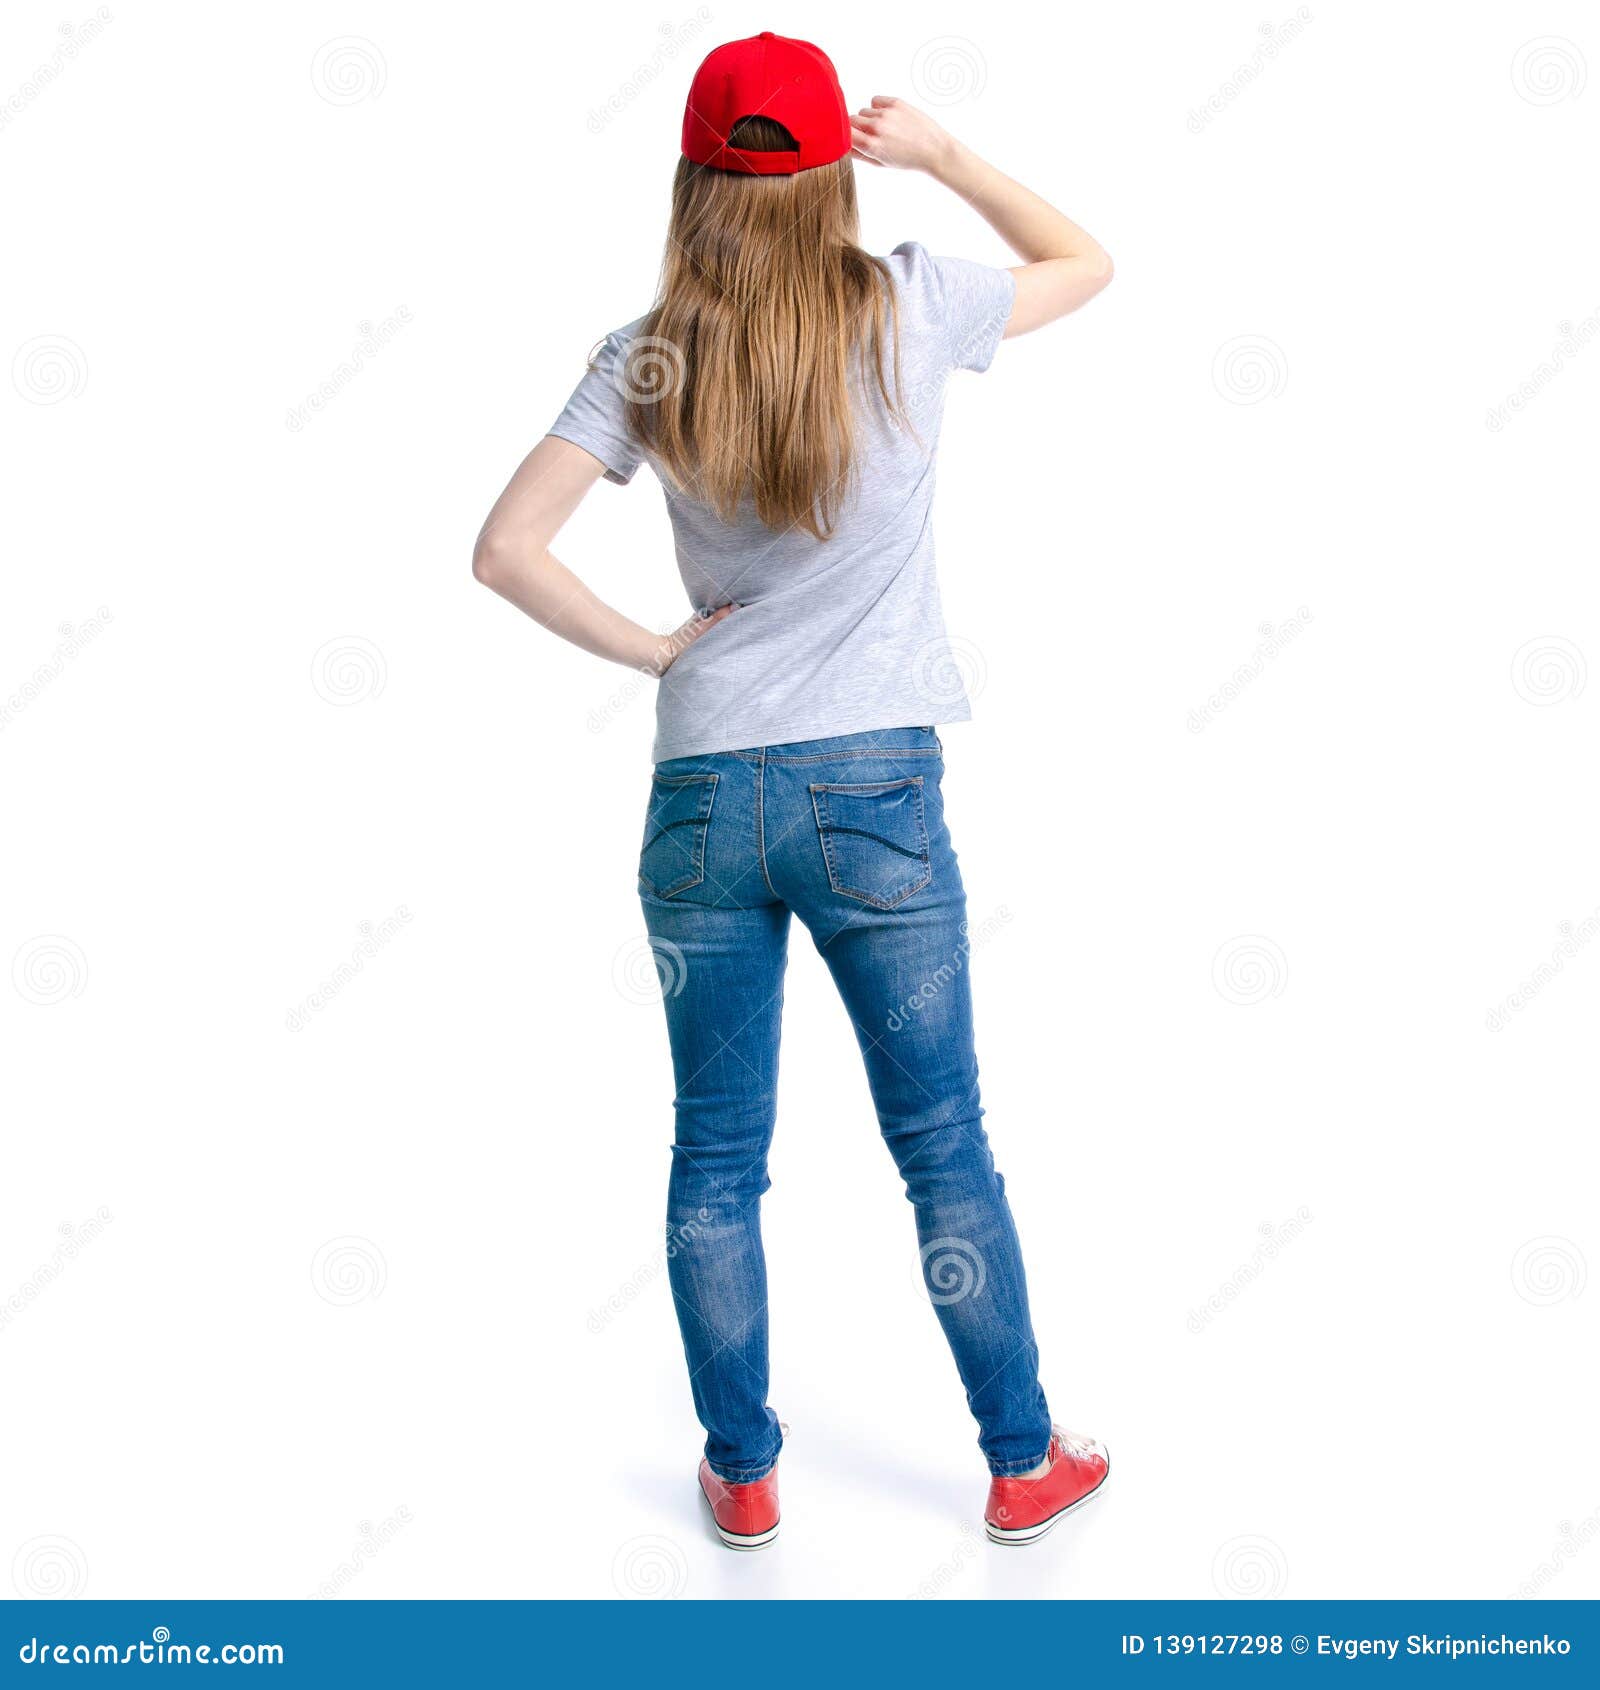 red cap blue jeans